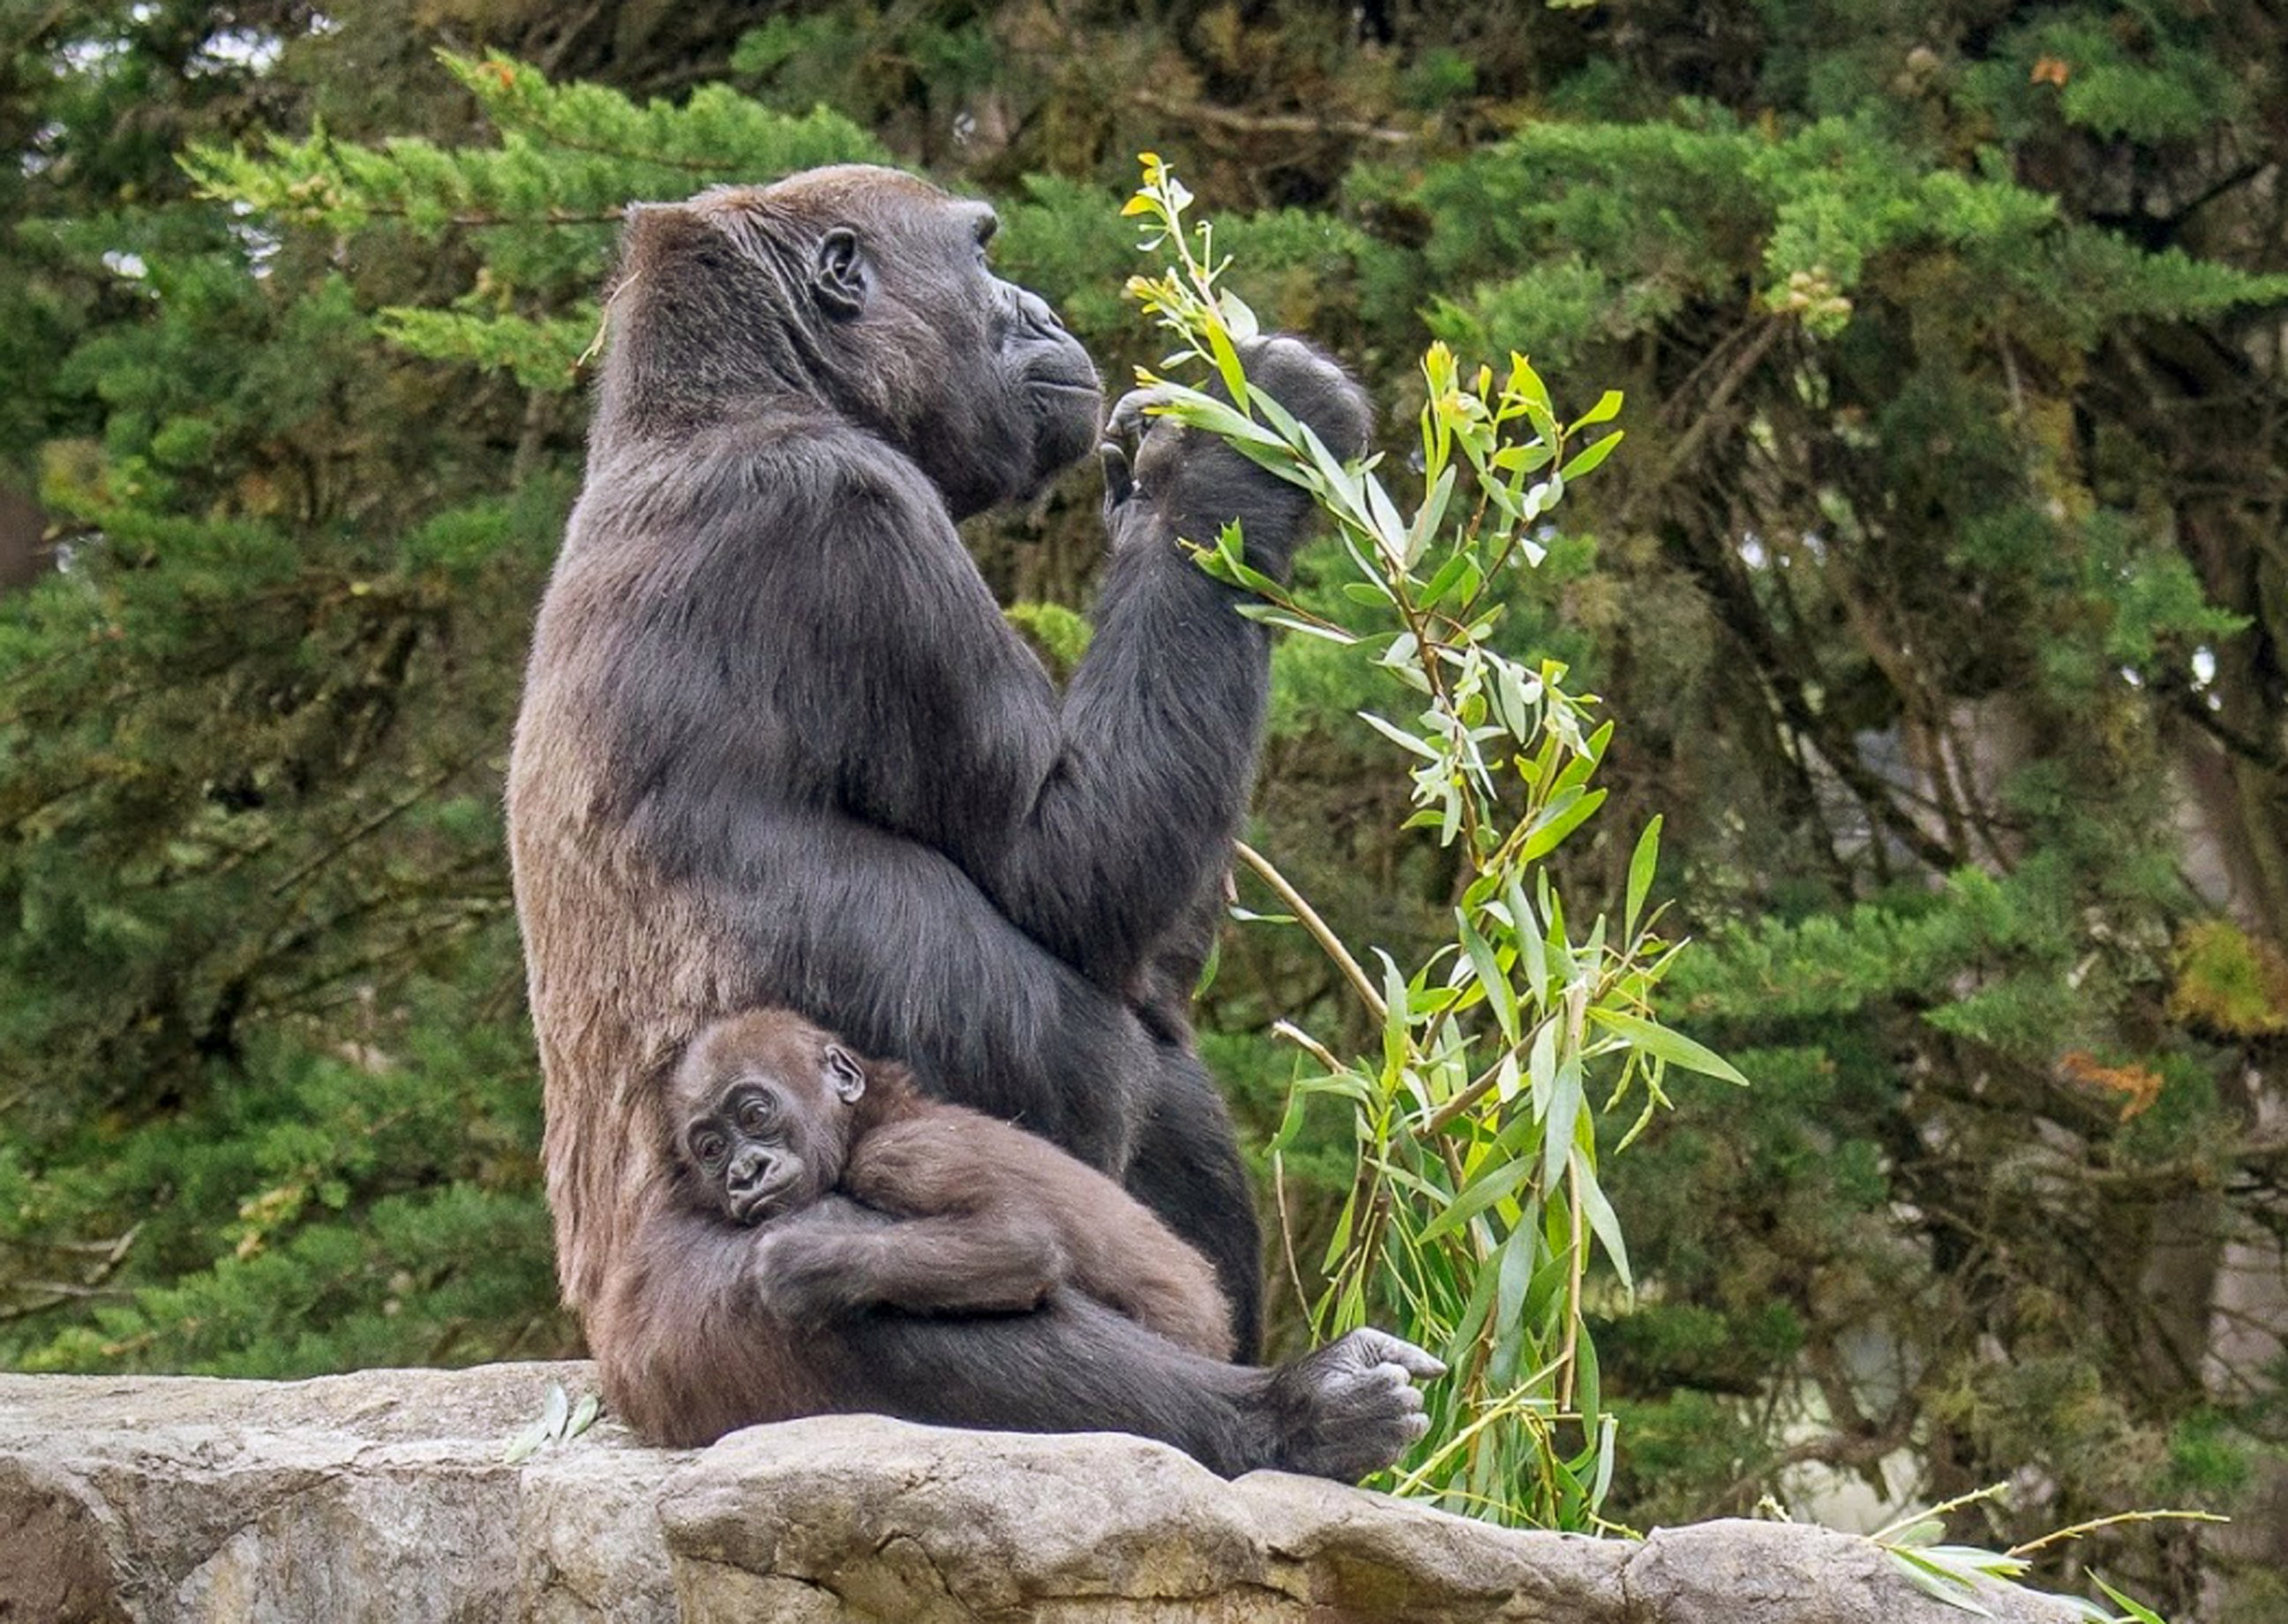 PHOTO: San Francisco Zoo's baby female lowland gorilla, named Kabibe, with her grandmother, Bawang, is seen in this June 12, 2014 photo.